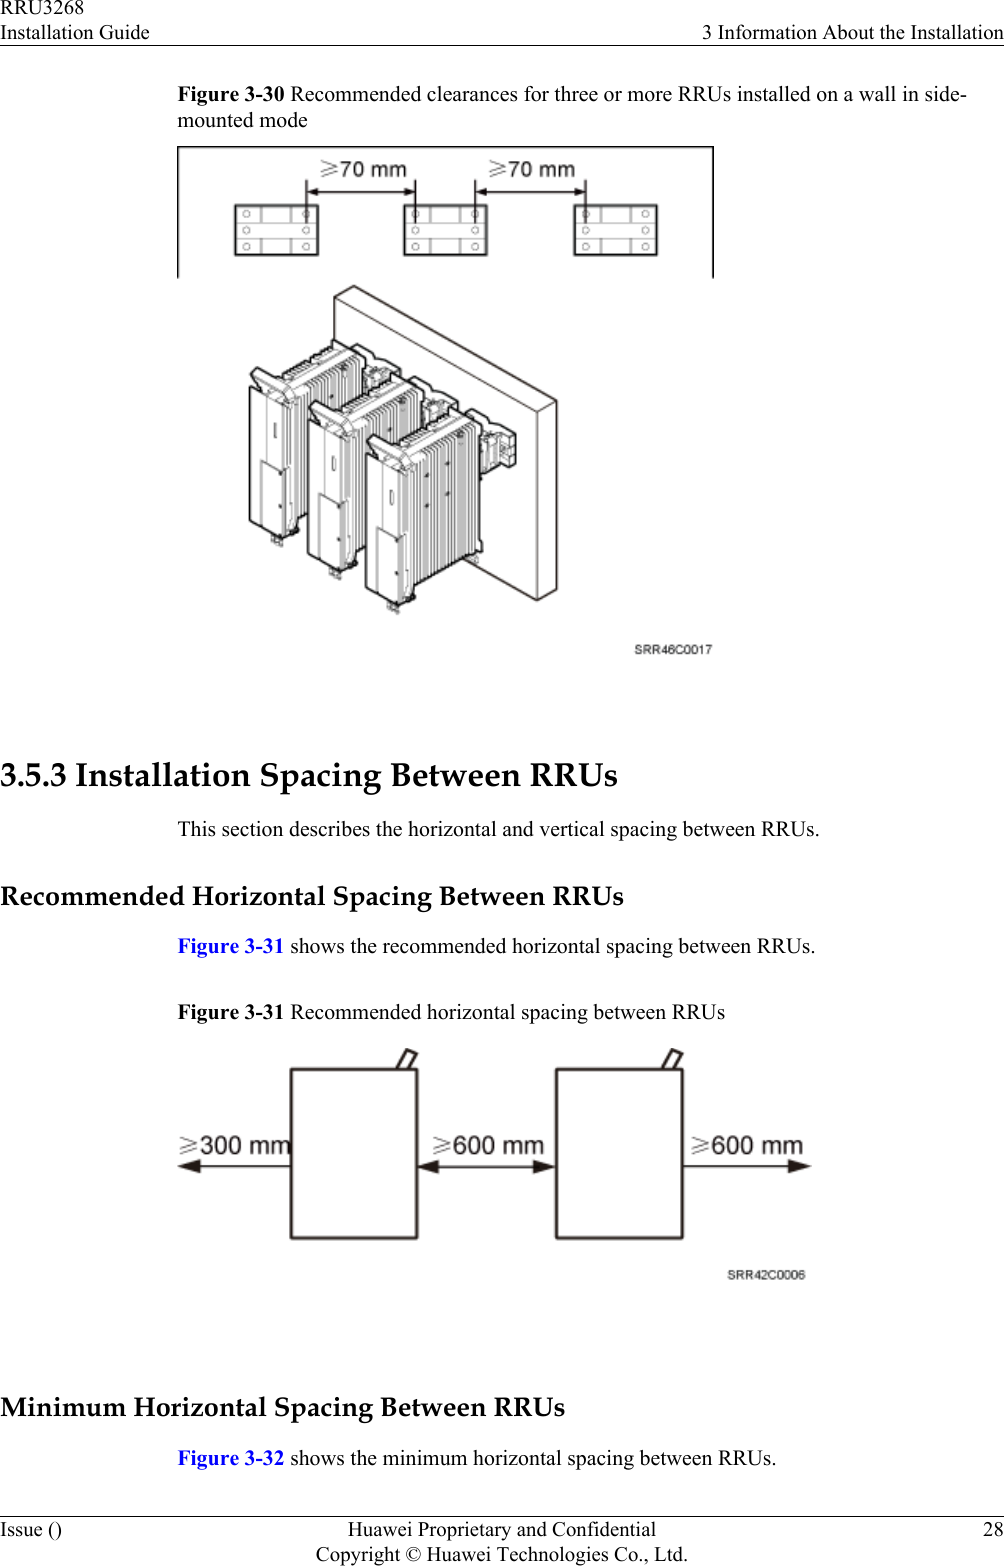 Figure 3-30 Recommended clearances for three or more RRUs installed on a wall in side-mounted mode 3.5.3 Installation Spacing Between RRUsThis section describes the horizontal and vertical spacing between RRUs.Recommended Horizontal Spacing Between RRUsFigure 3-31 shows the recommended horizontal spacing between RRUs.Figure 3-31 Recommended horizontal spacing between RRUs Minimum Horizontal Spacing Between RRUsFigure 3-32 shows the minimum horizontal spacing between RRUs.RRU3268Installation Guide 3 Information About the InstallationIssue () Huawei Proprietary and ConfidentialCopyright © Huawei Technologies Co., Ltd.28